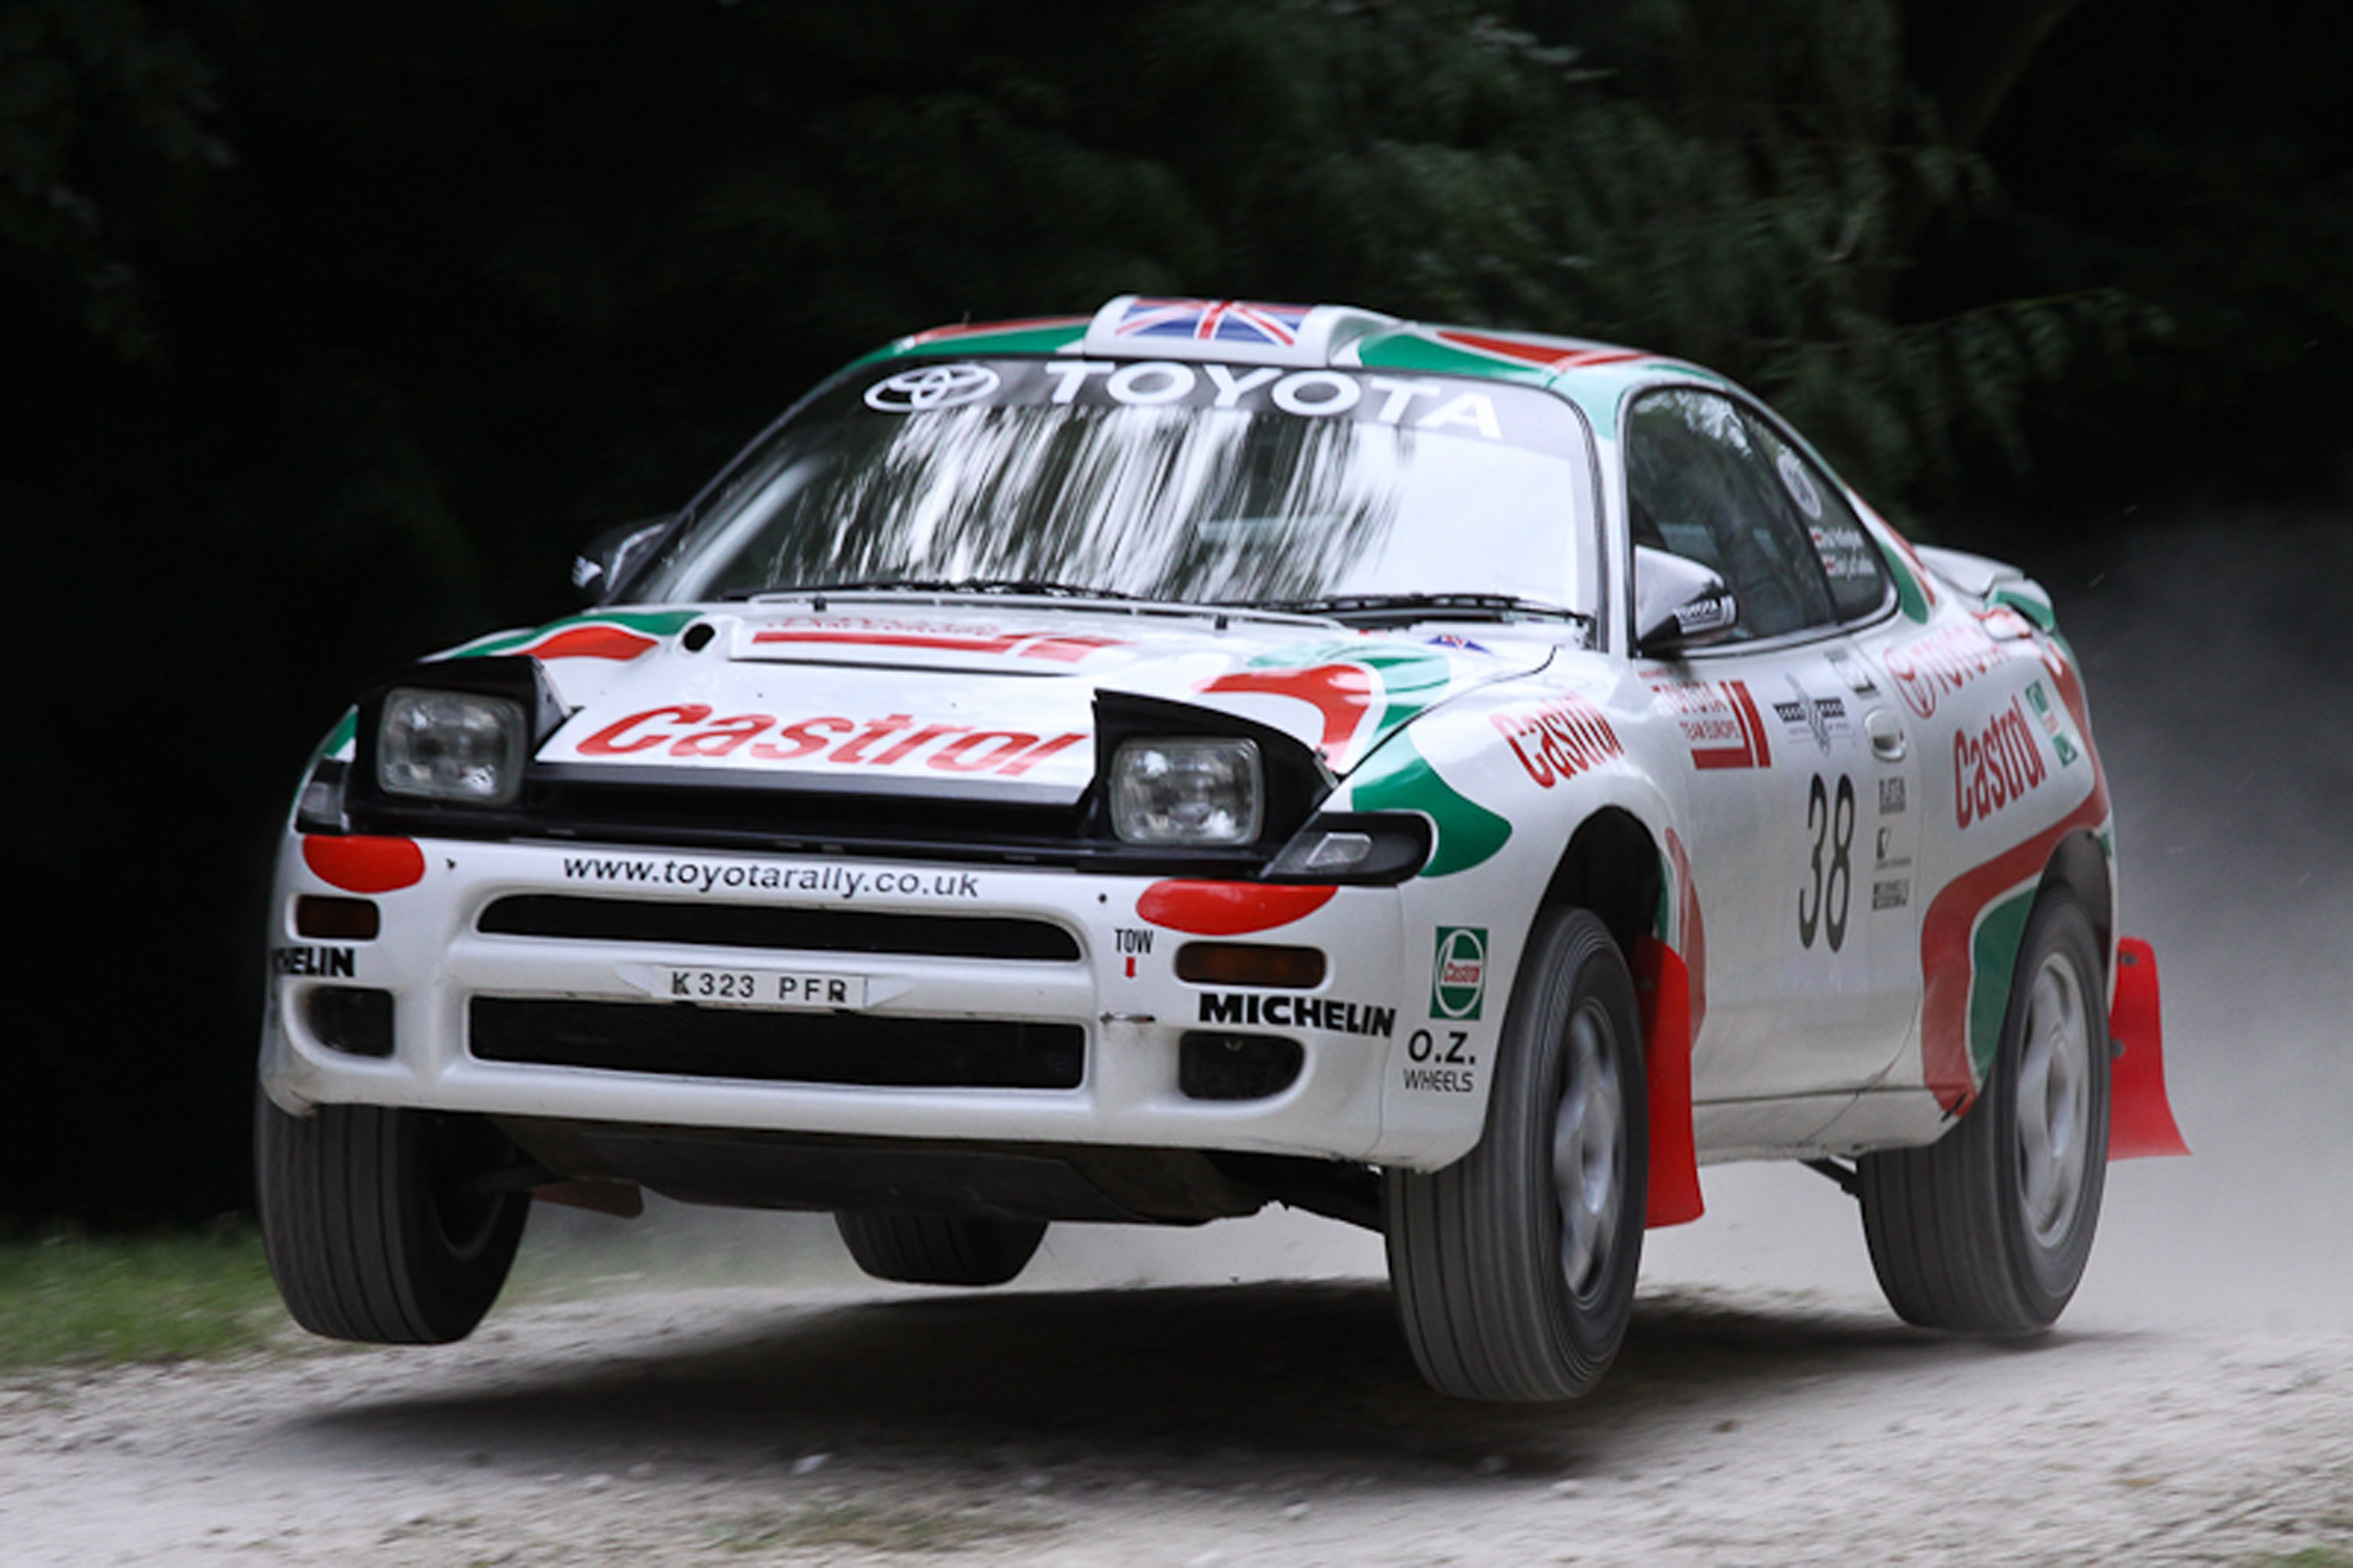 Toyota World Champions at Goodwood Festival of Speed